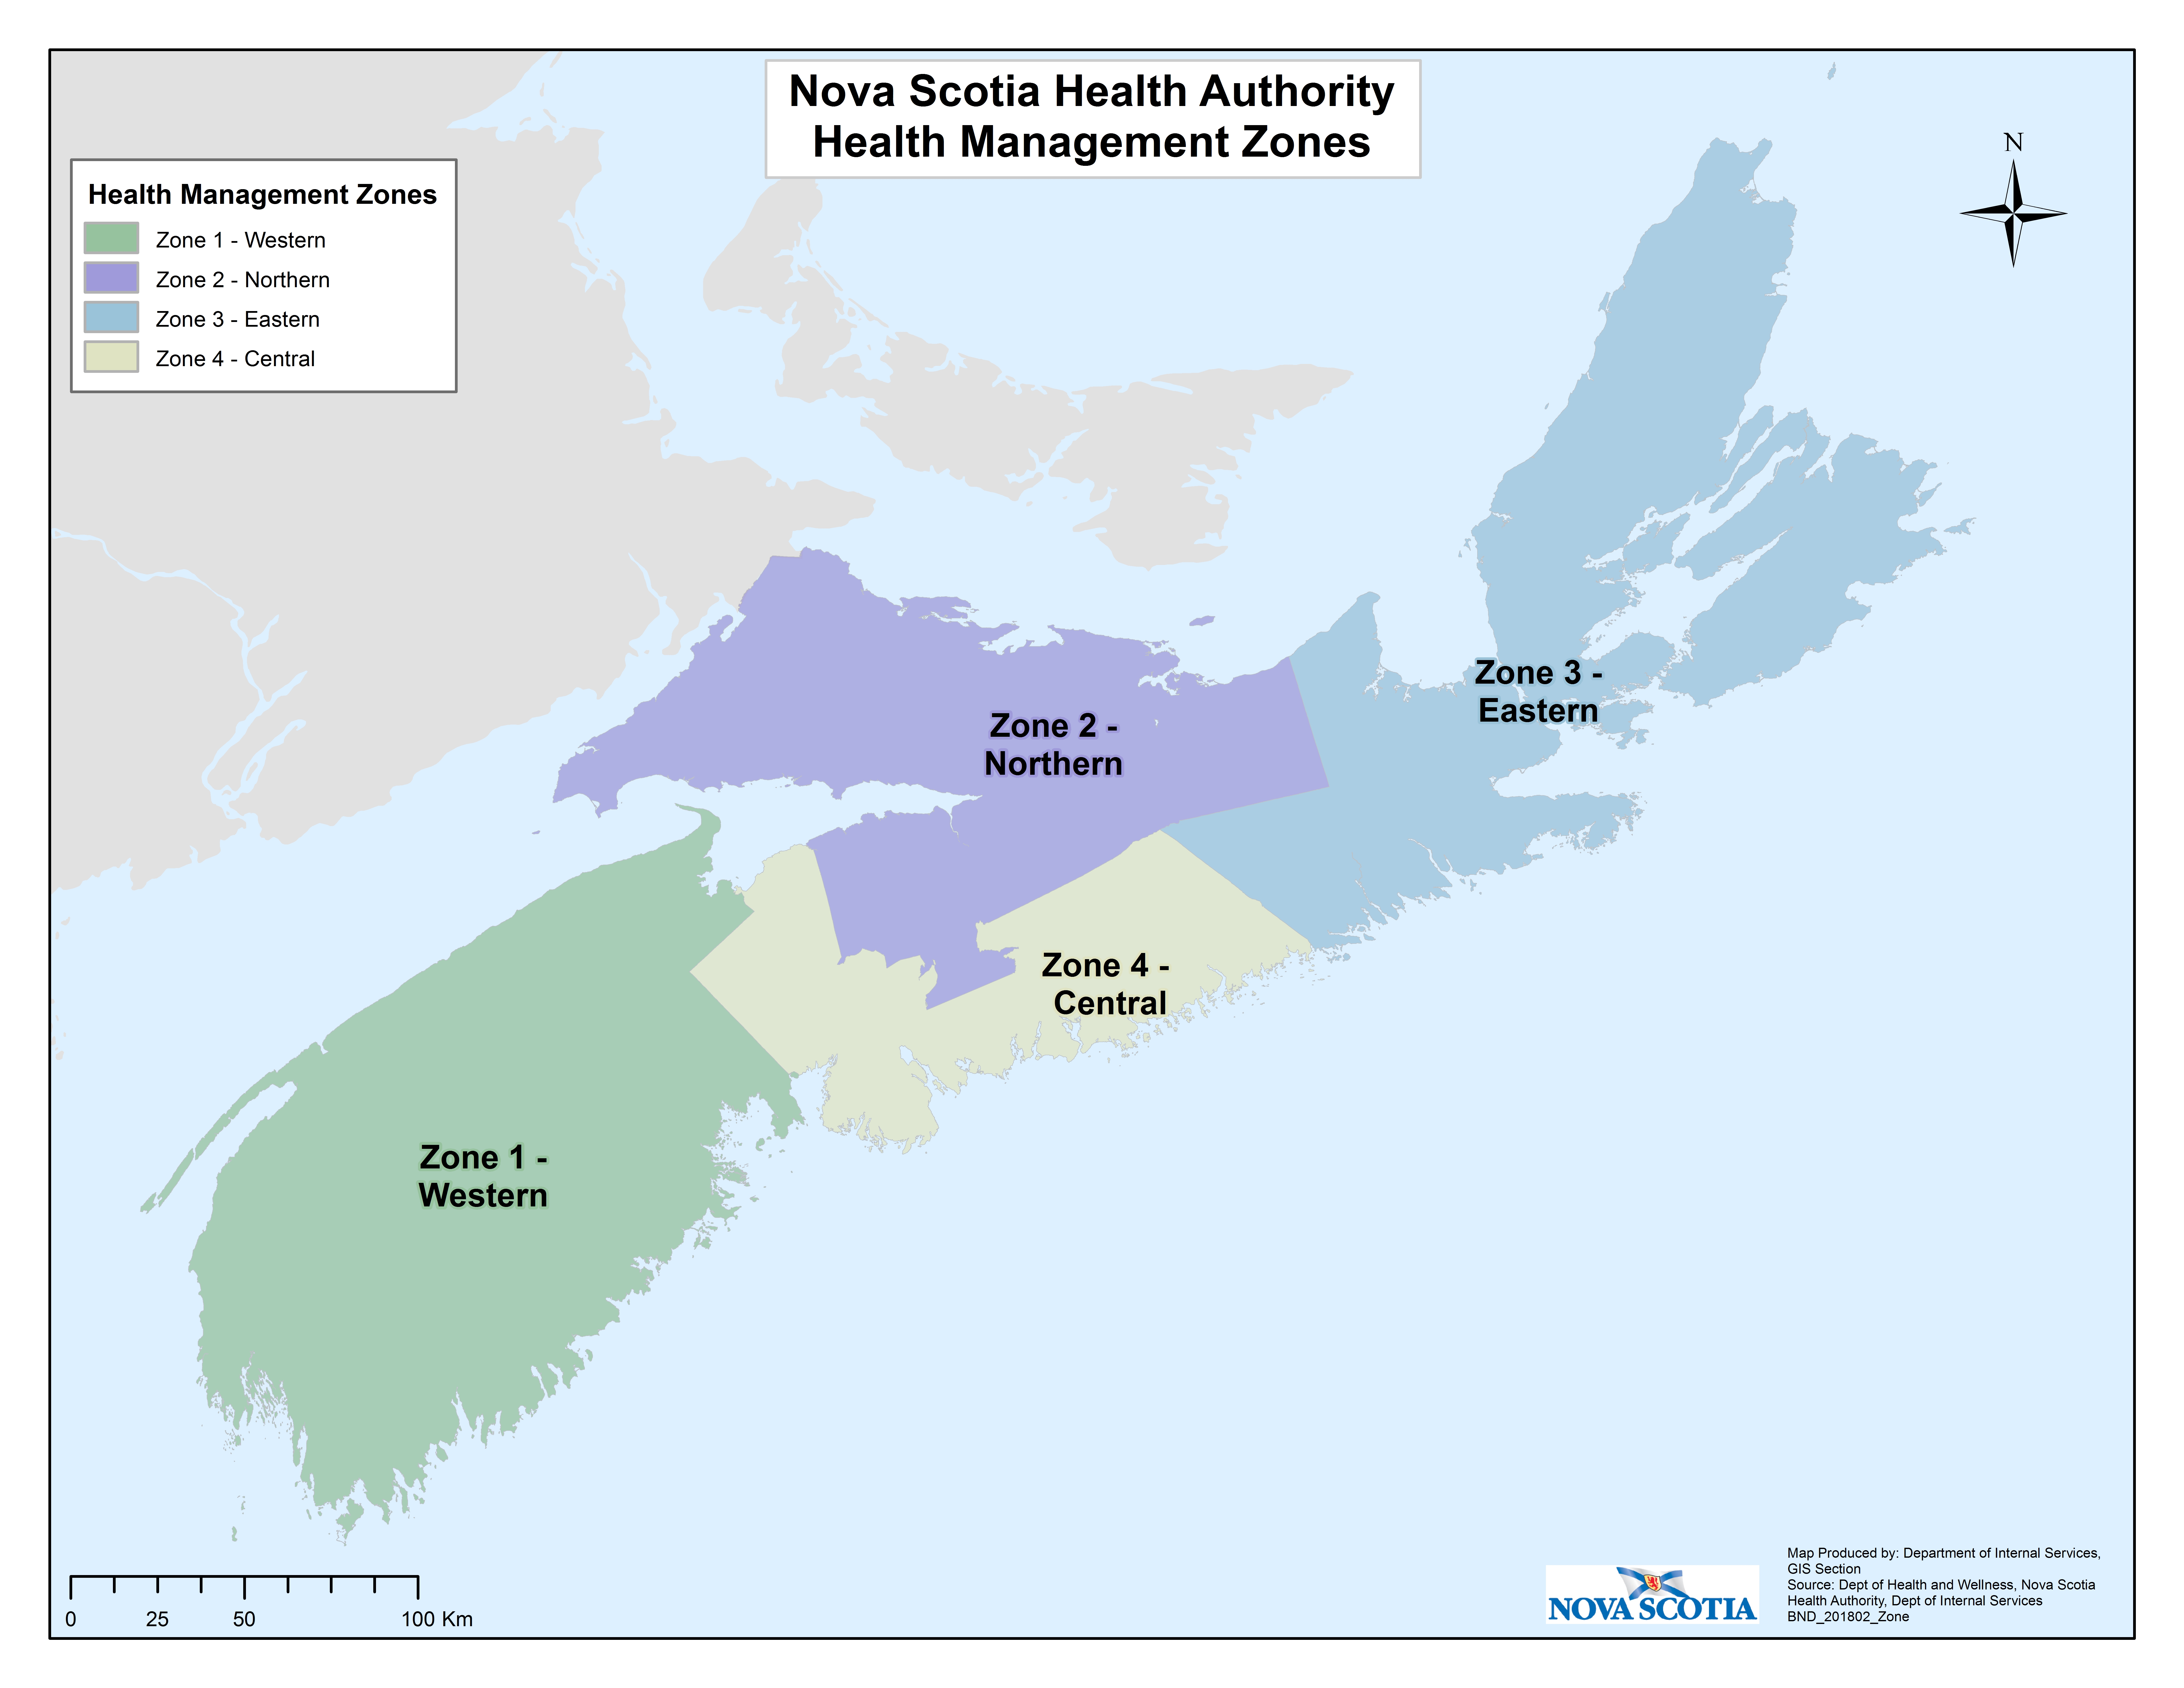 A map outlining the Nova Scotia Health Authority Health Management Zones